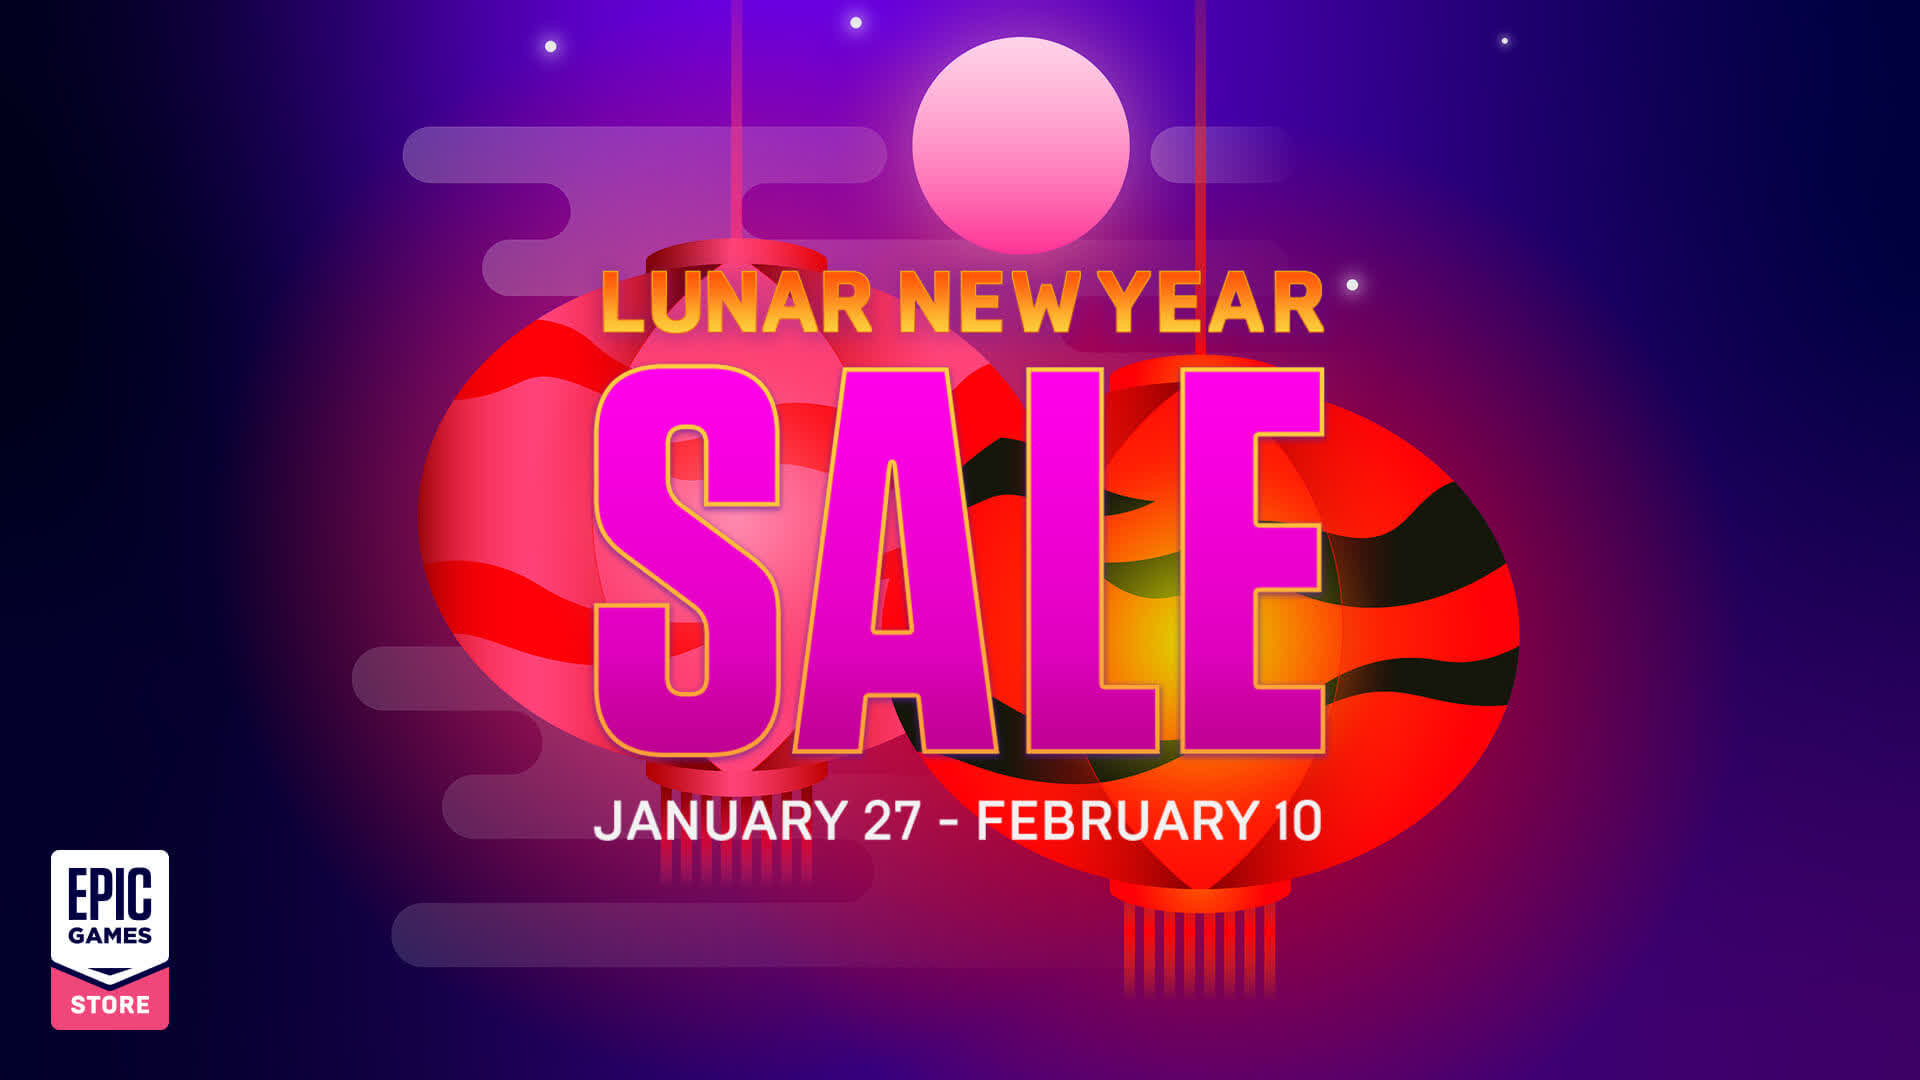 The Epic Games Store's Lunar New Year Sale is live